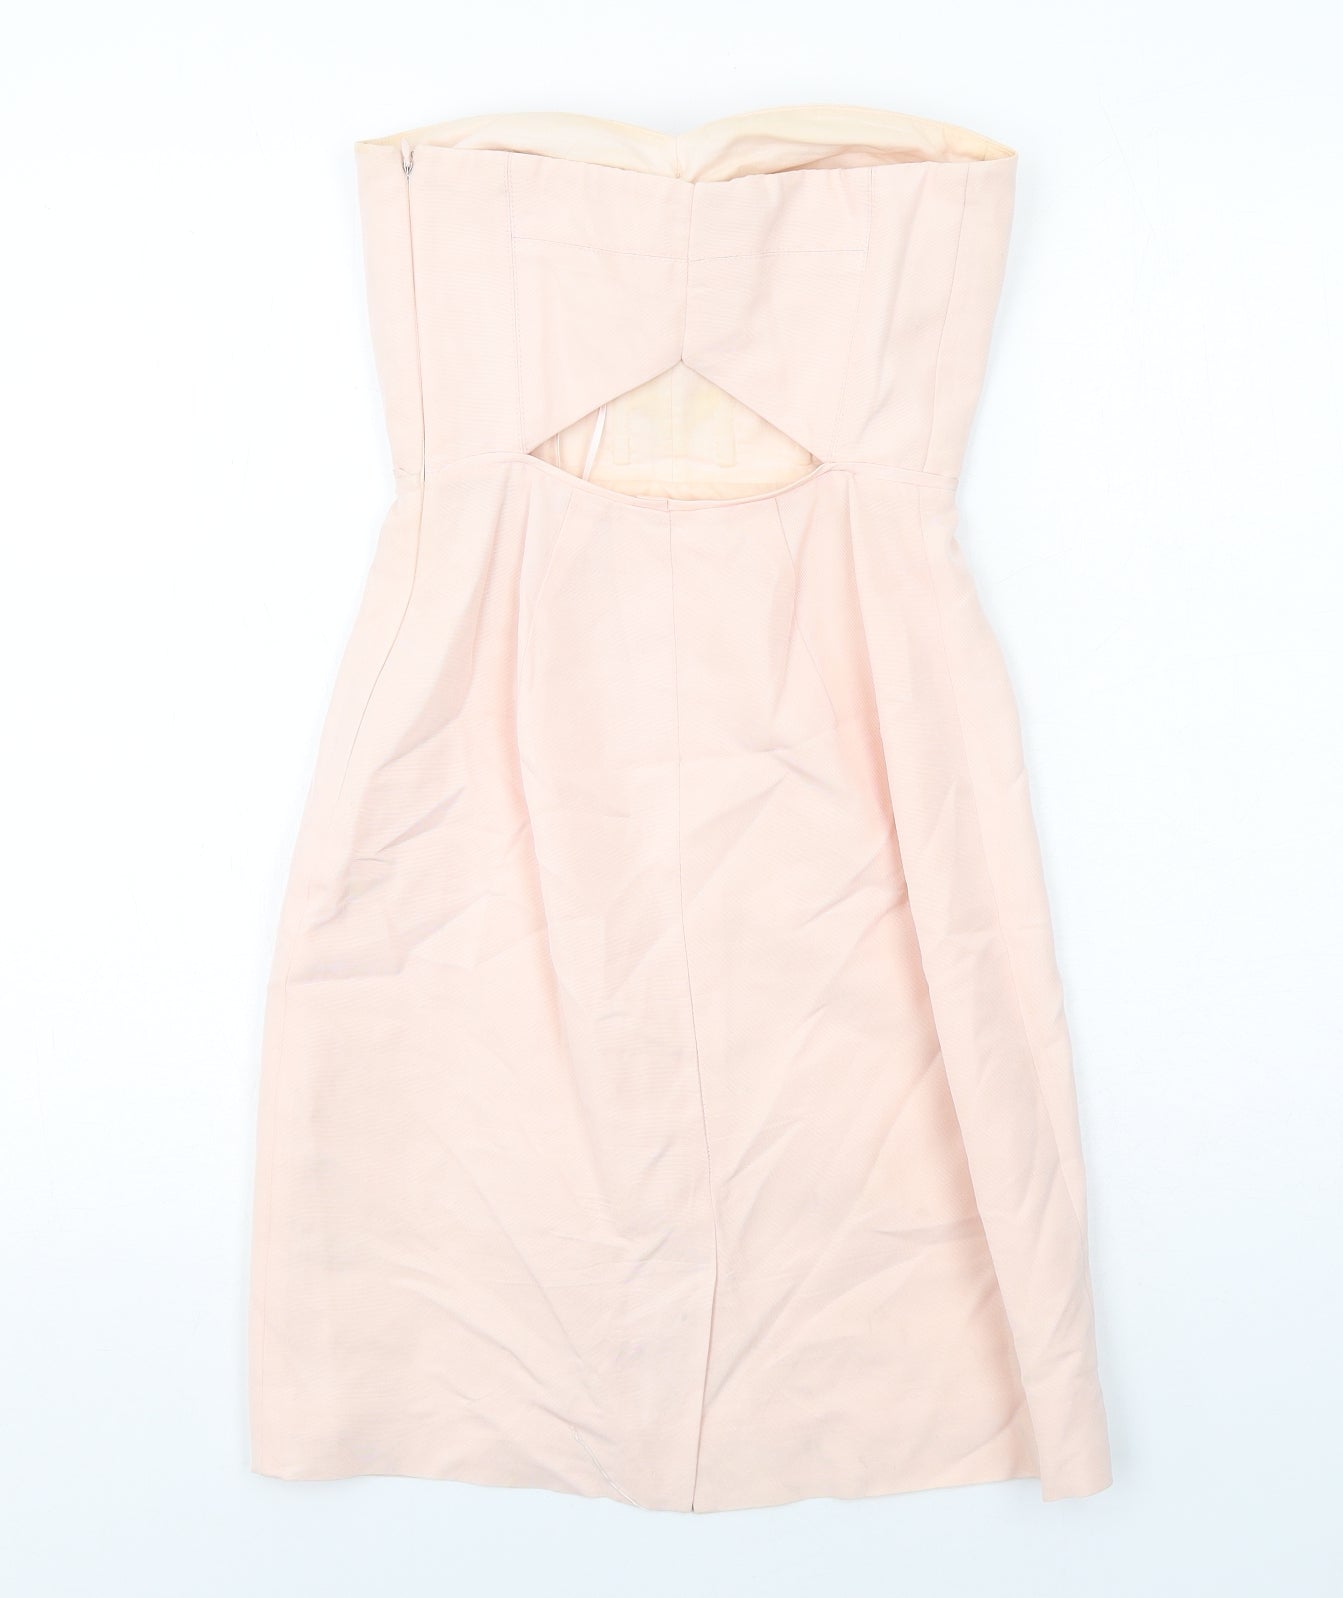 J.CREW Womens Pink Cotton Bodycon Size 4 Off the Shoulder Zip